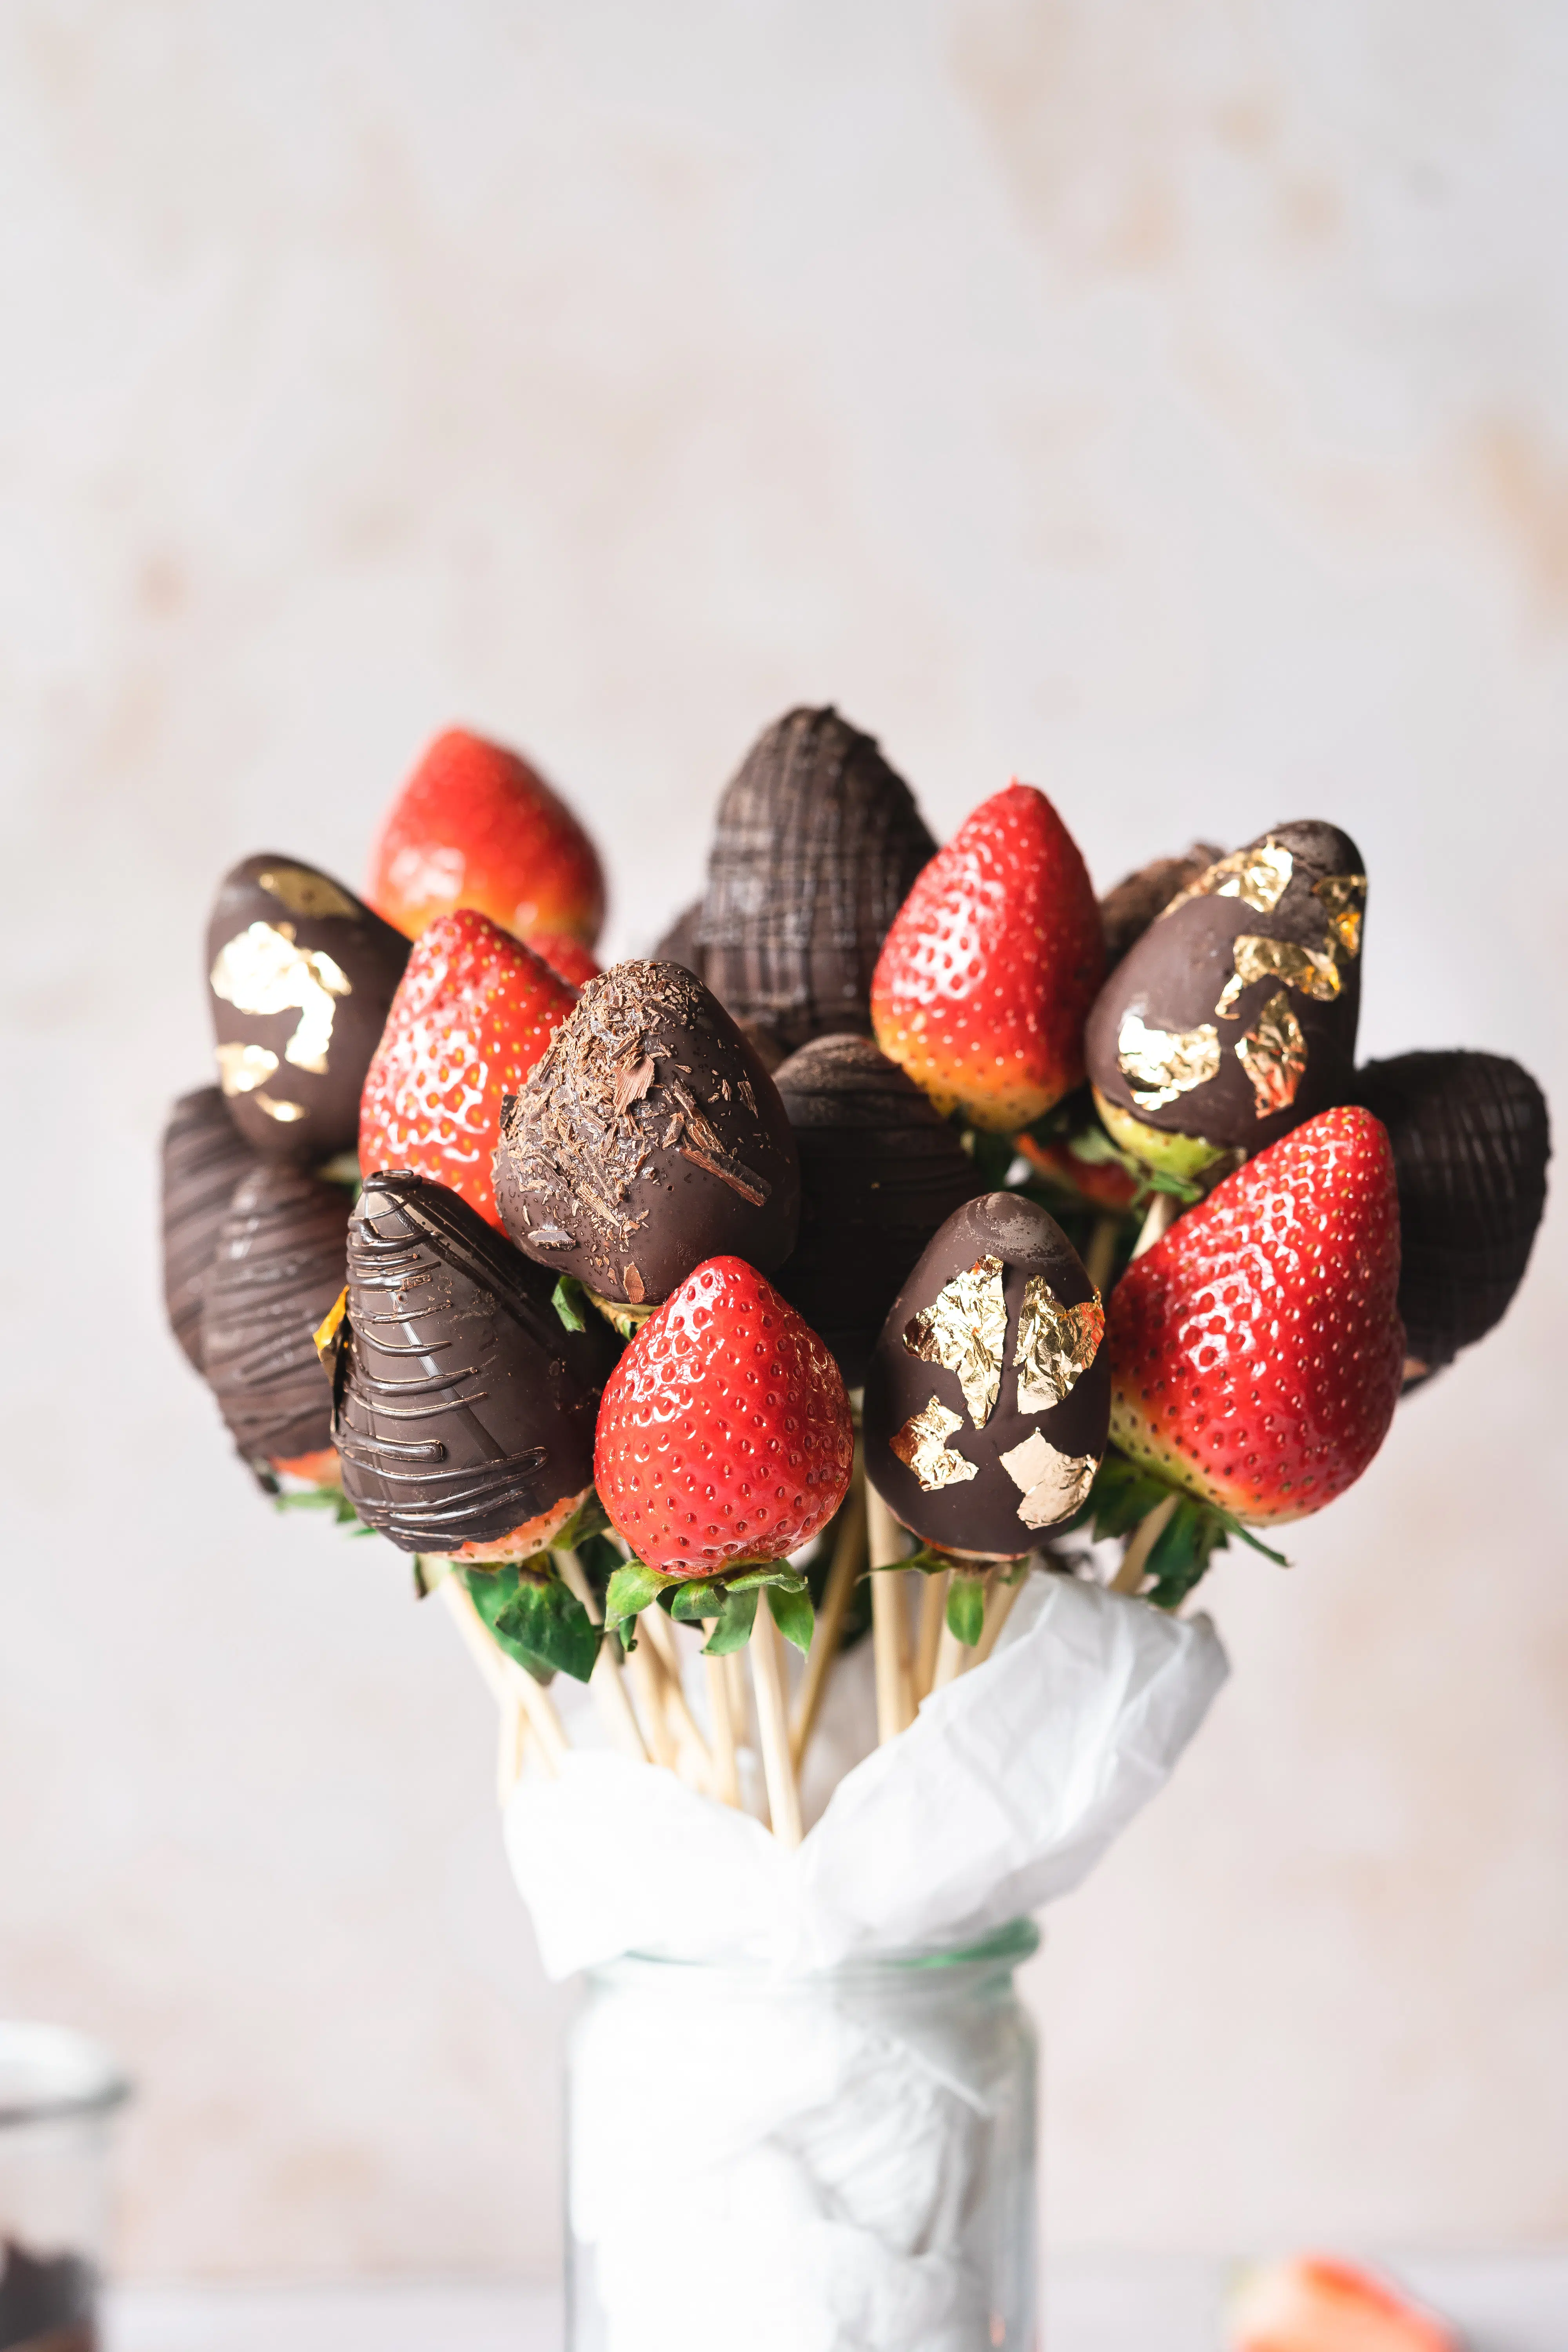 Chocolate covered strawberry bouquet in a glass vase.